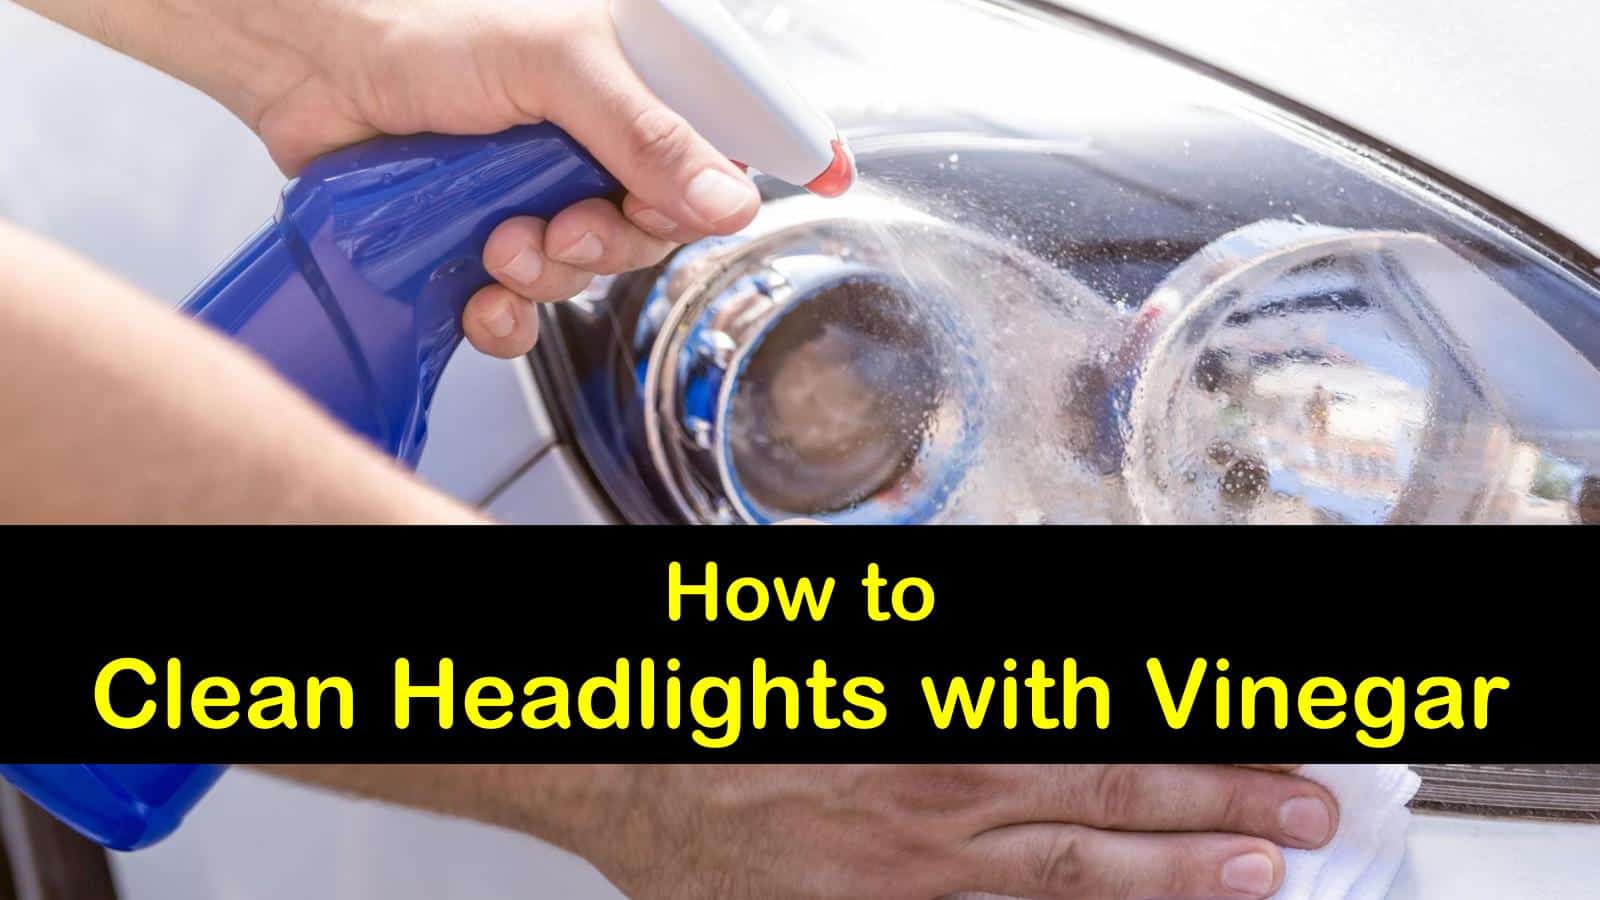 how to clean headlights with vinegar titleimg1